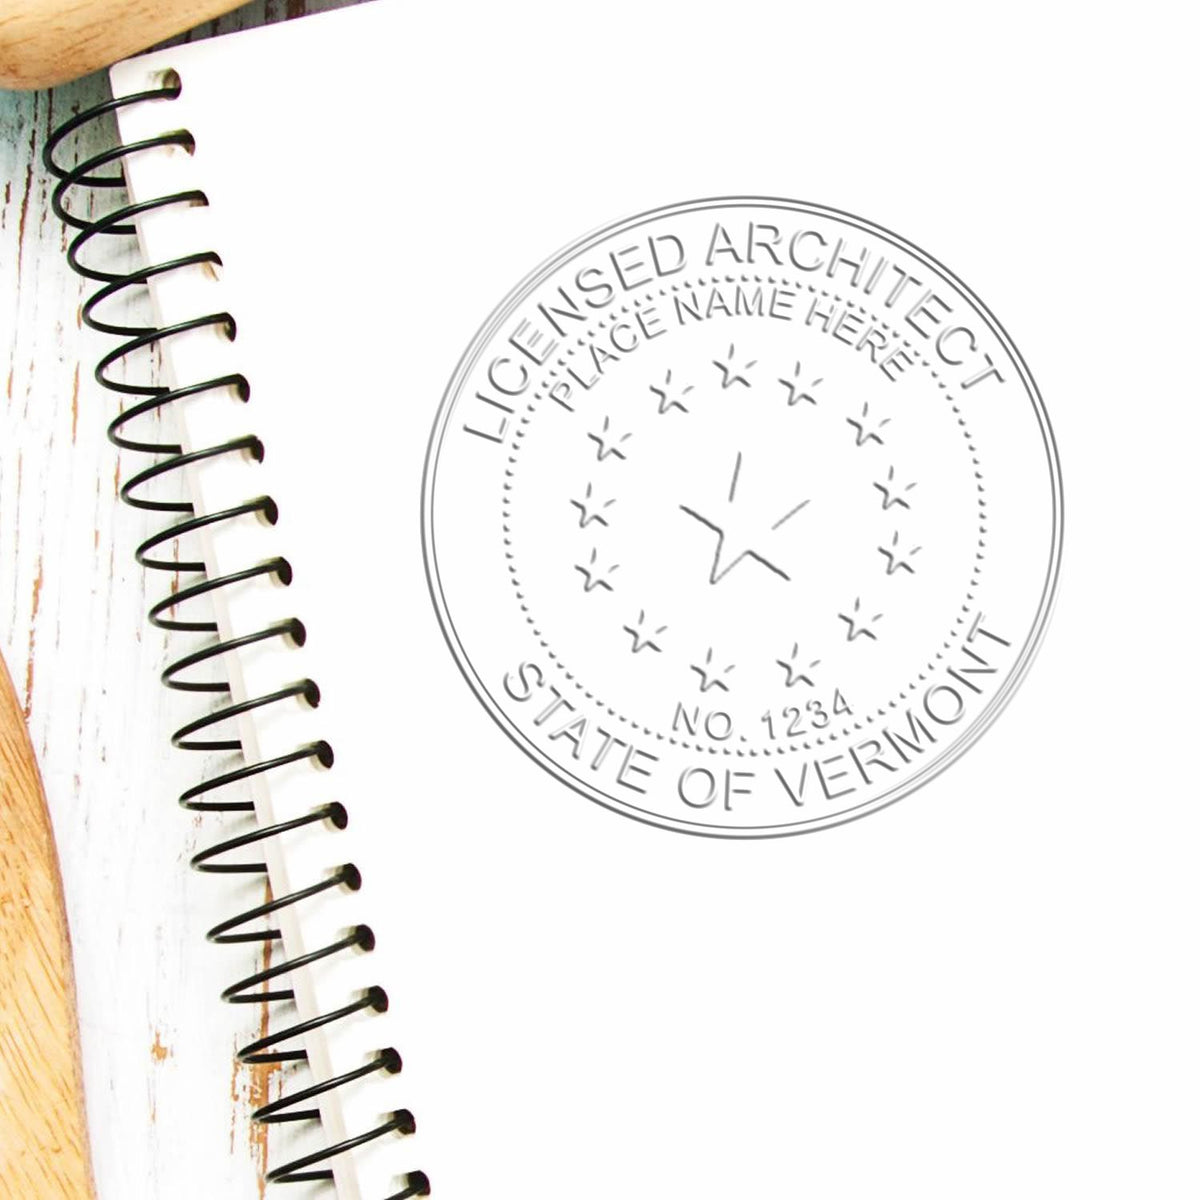 The Gift Vermont Architect Seal stamp impression comes to life with a crisp, detailed image stamped on paper - showcasing true professional quality.